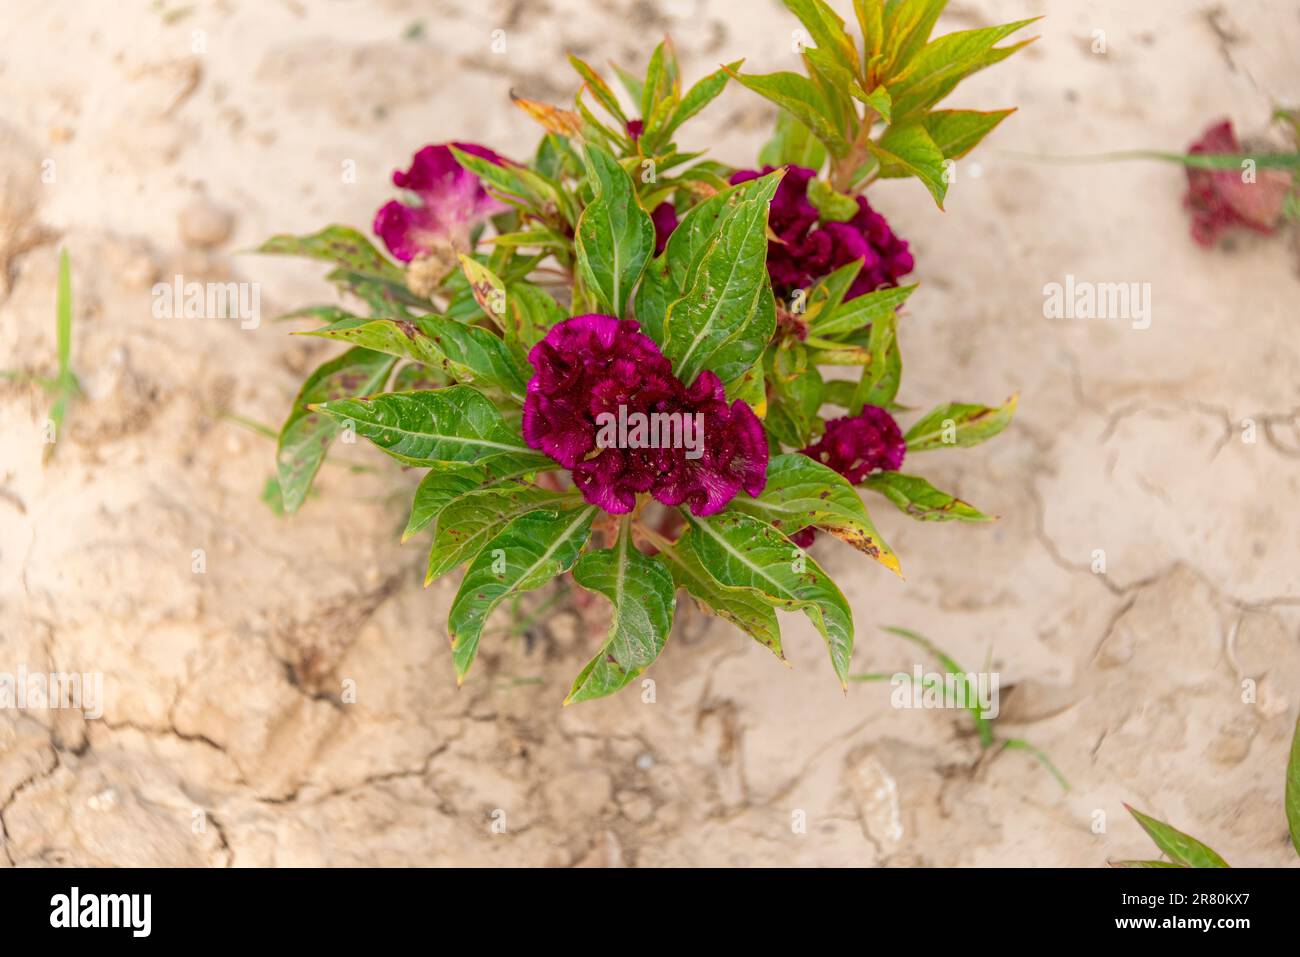 A cristate or crested variety of Celosia argentea. Stock Photo